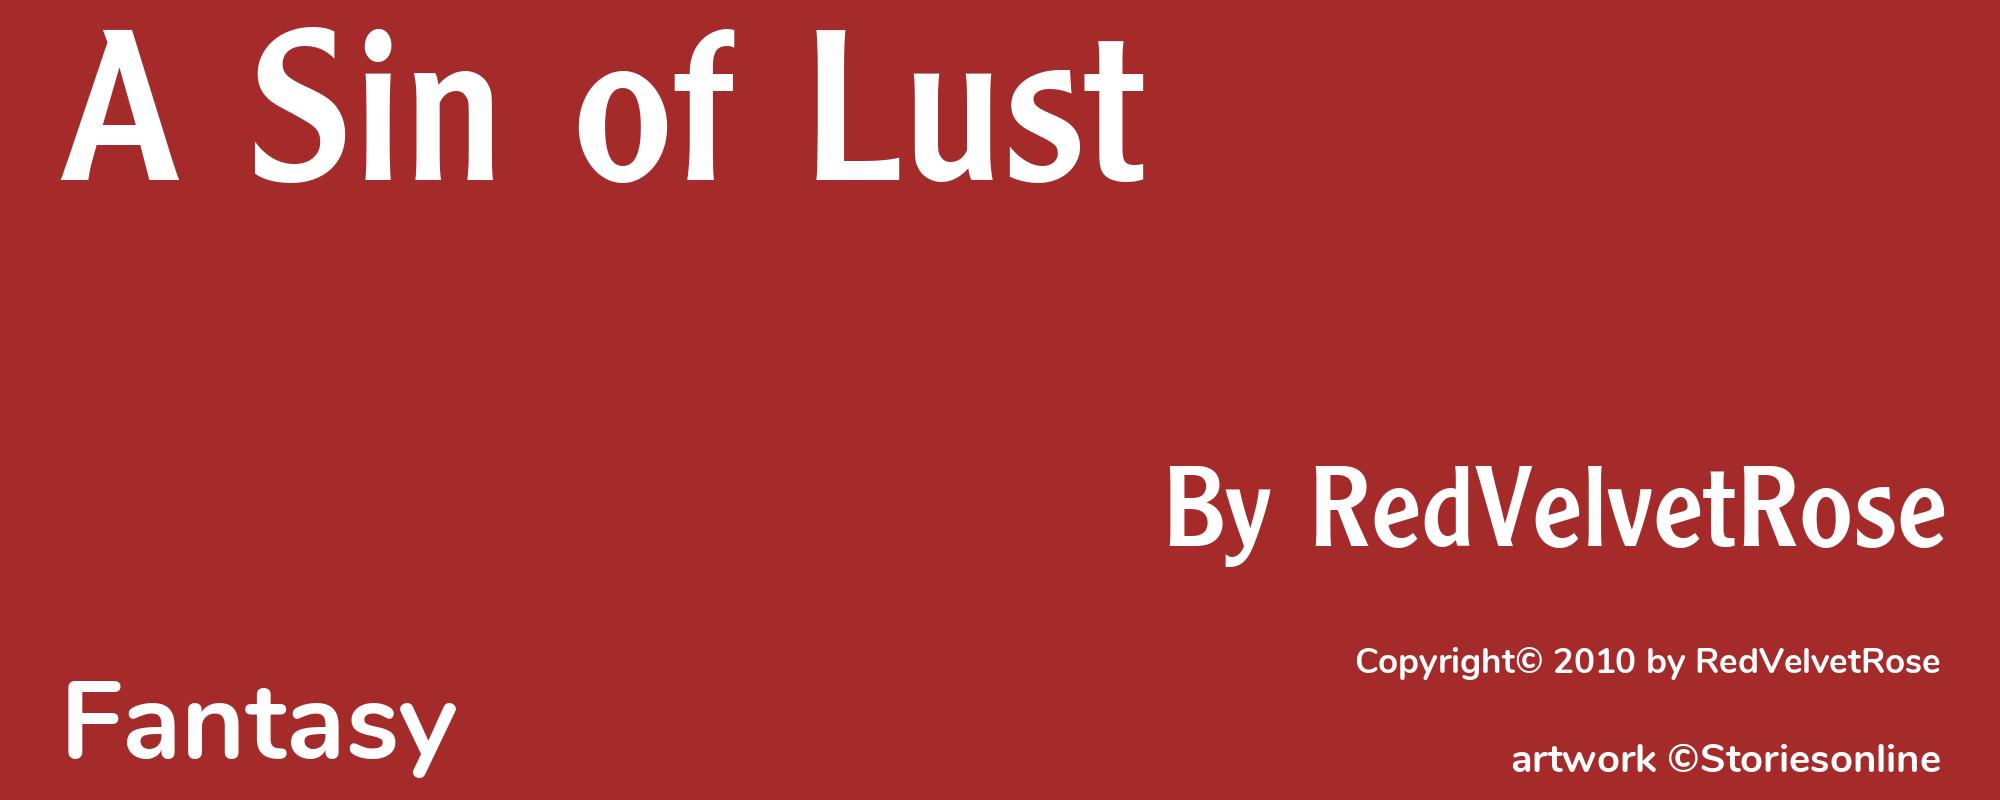 A Sin of Lust - Cover